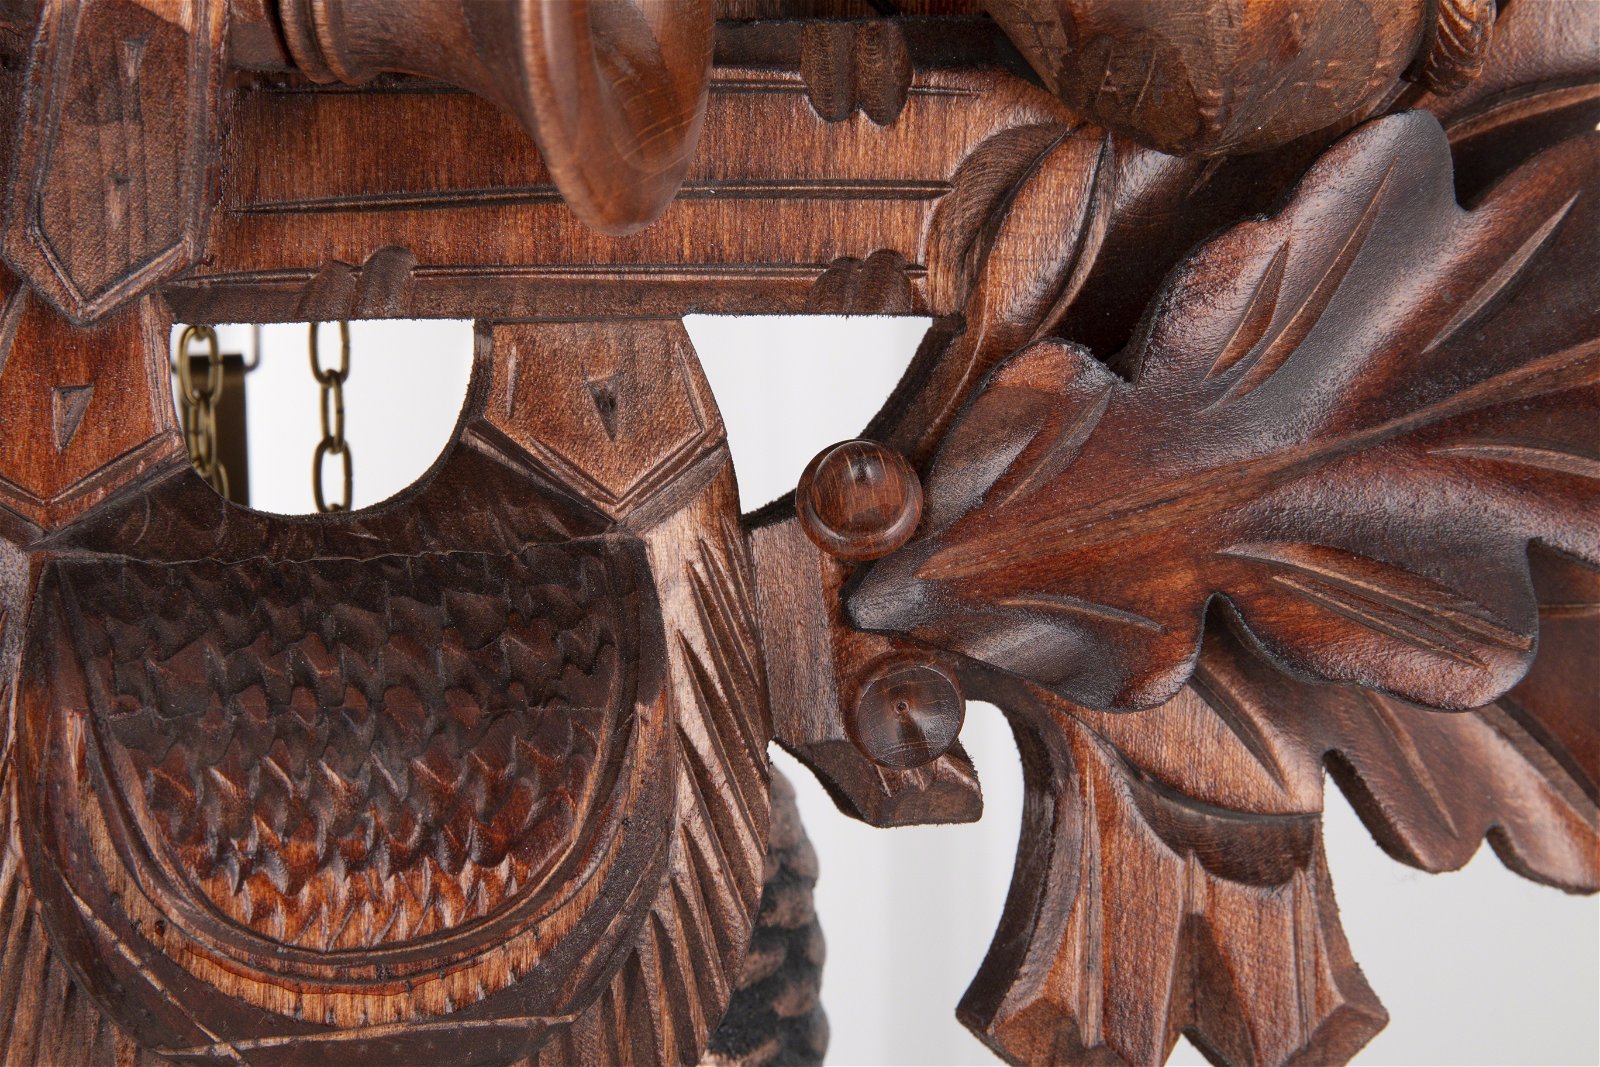 Cuckoo Clock 8-day-movement Carved-Style 50cm by Hönes